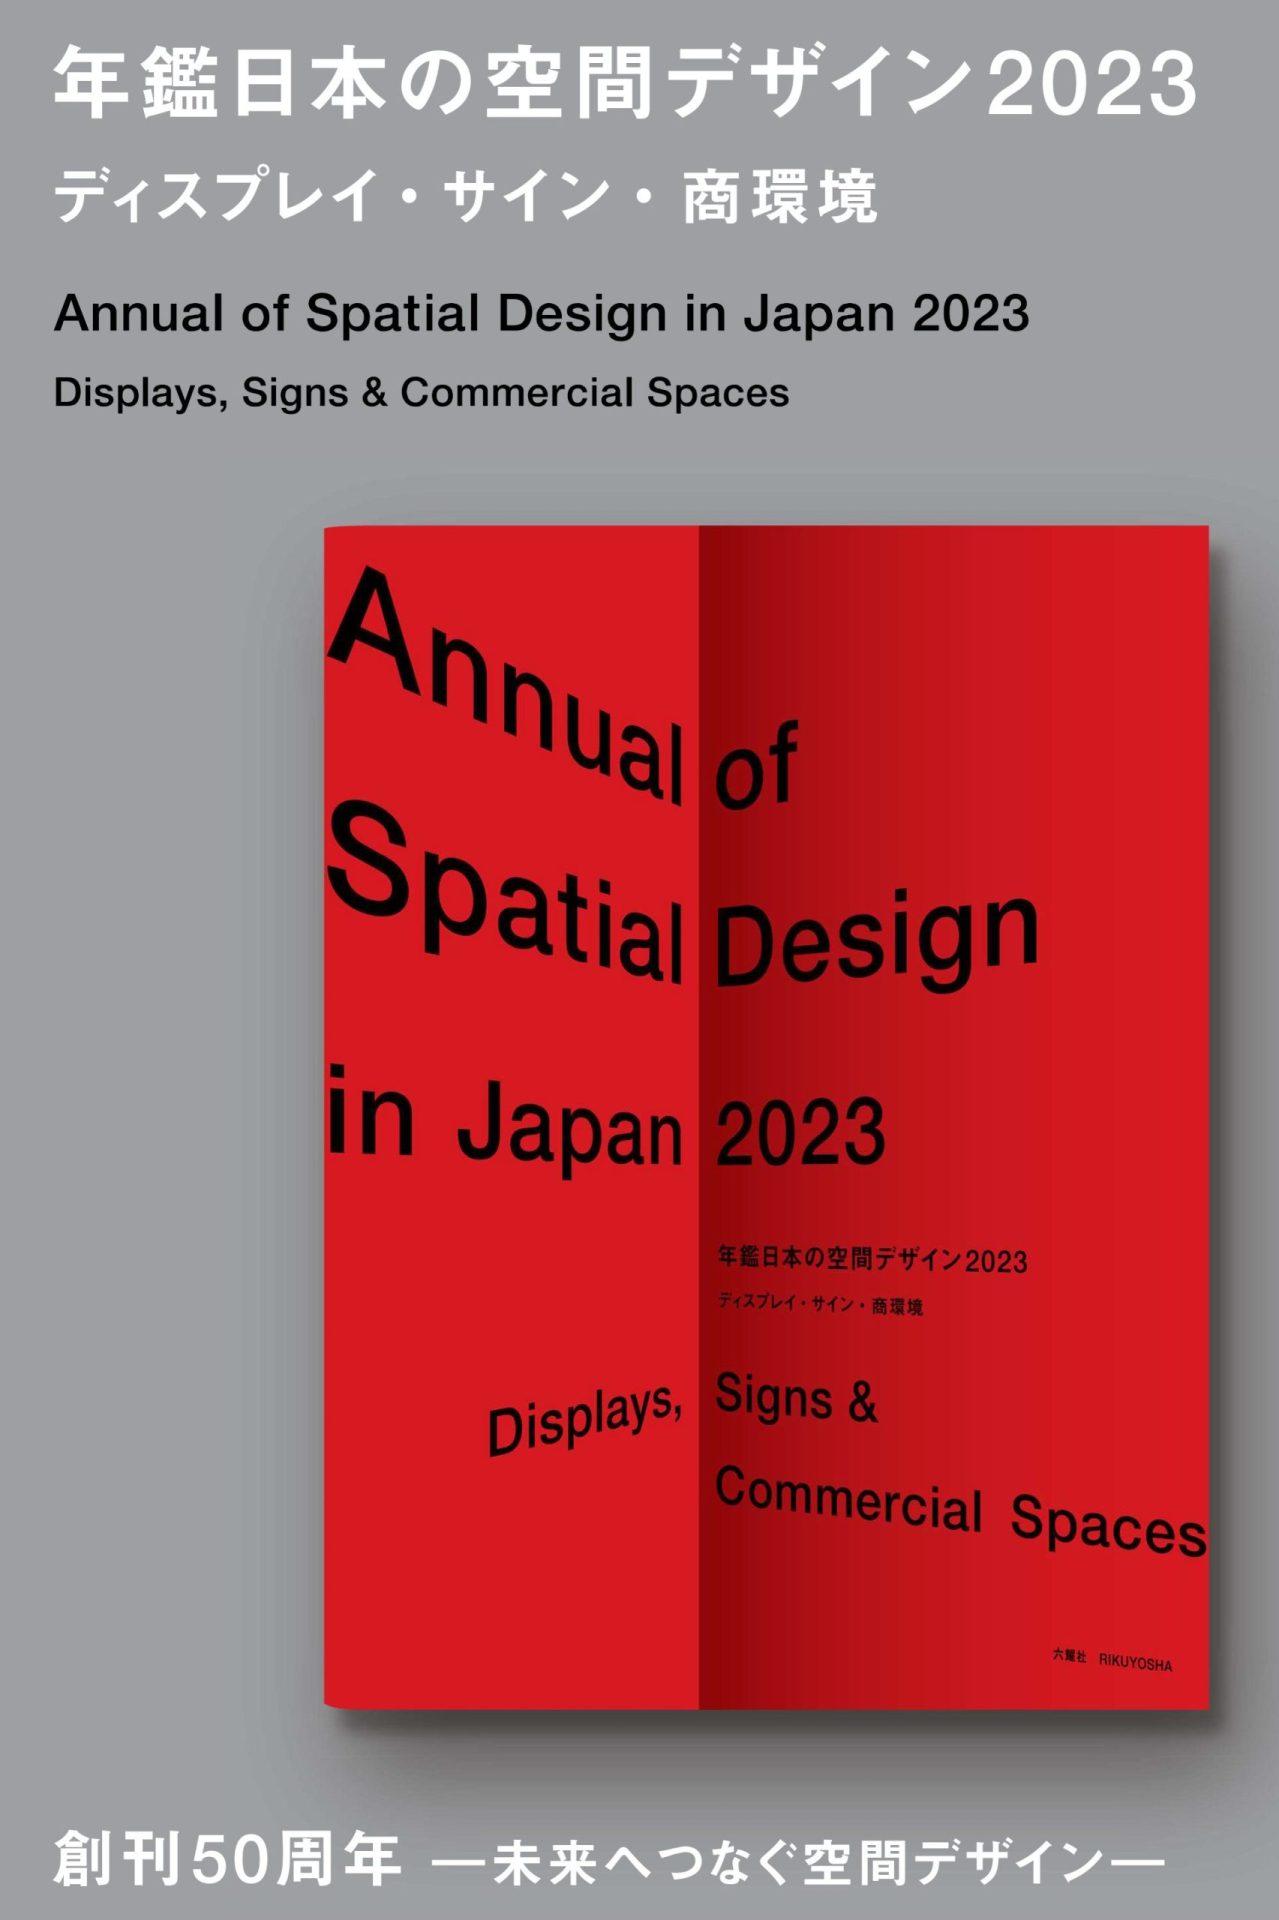 Publication information : Annual of Spatial Design in Japan 2023